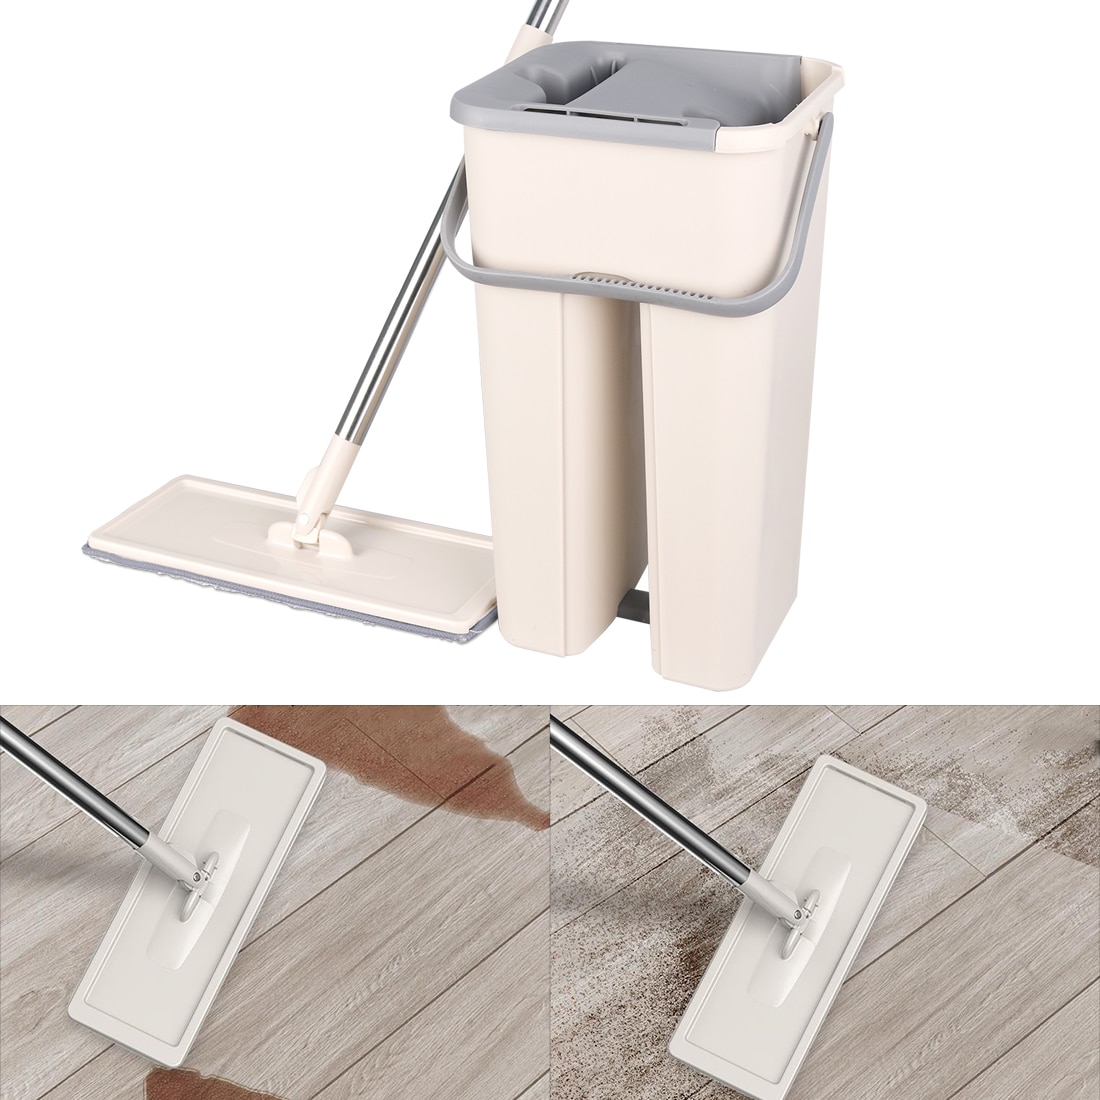 Mop Bucket With Wringer Cleaning Tool